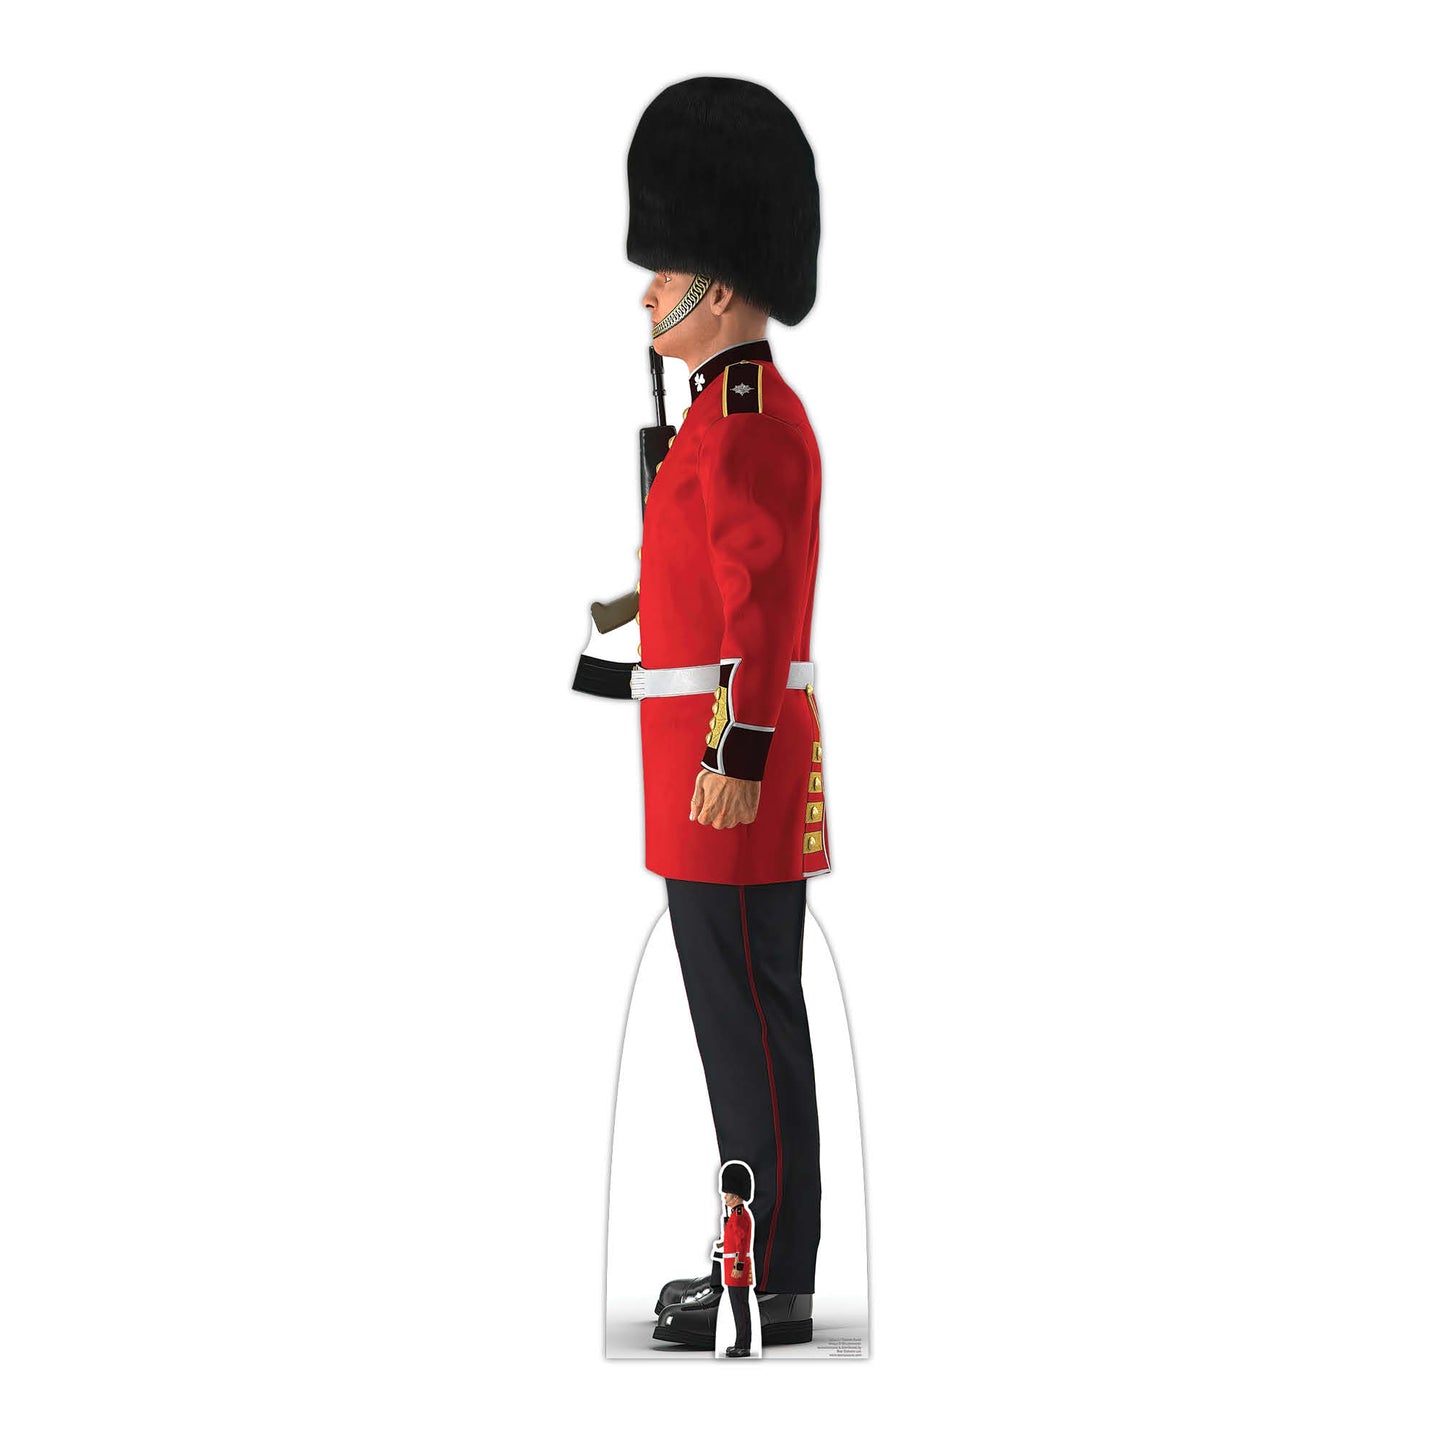 SC4111 Illustrated Palace Guard Facing Left Cardboard Cut Out Height 196cm